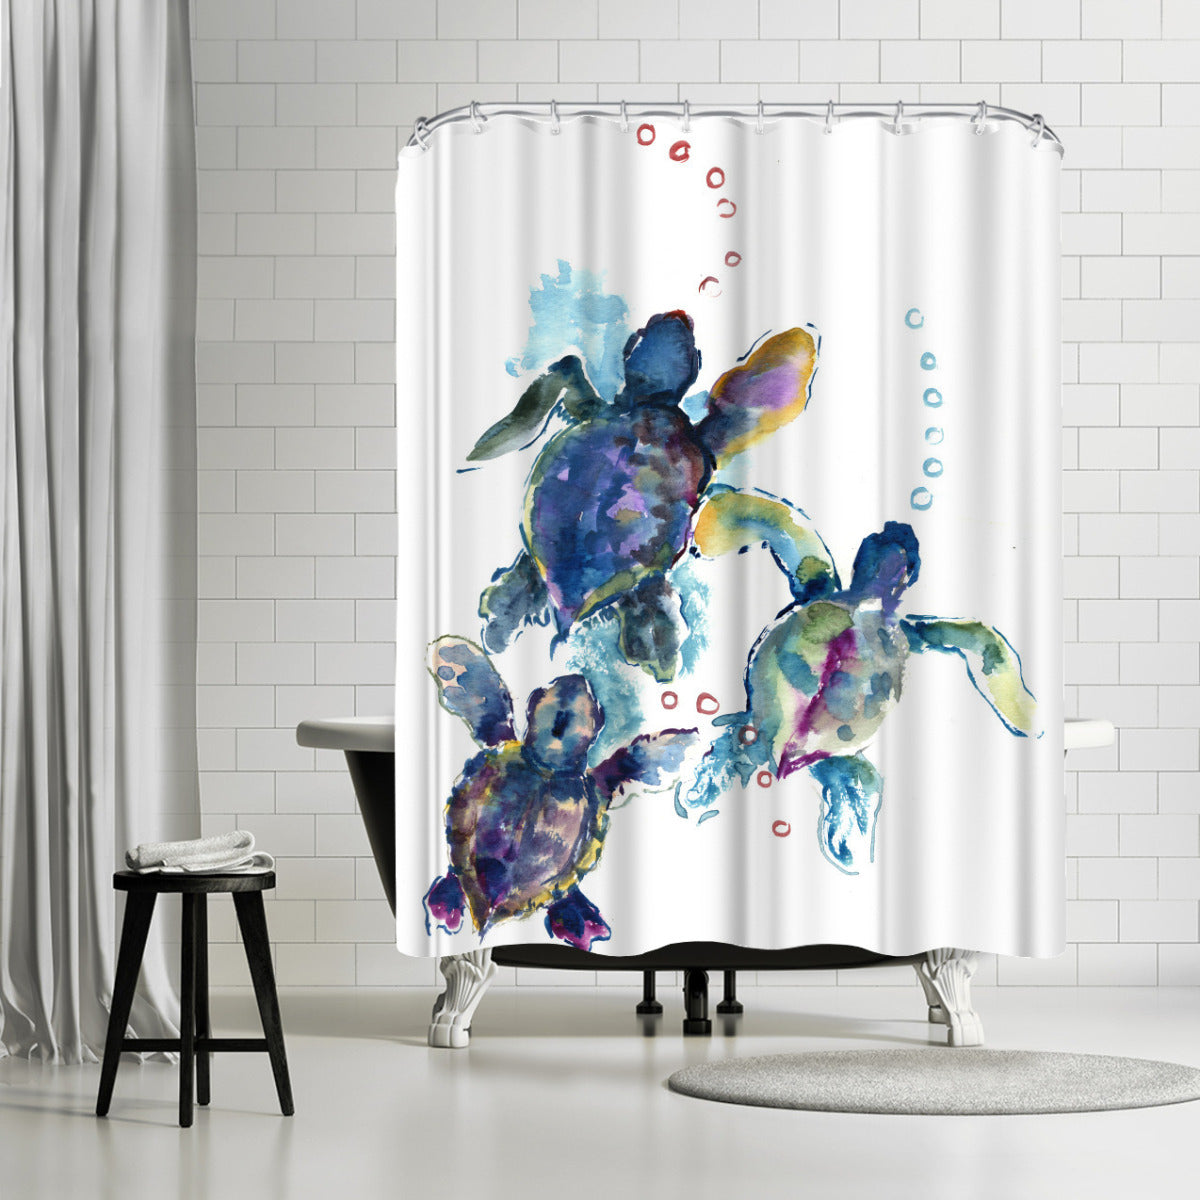 71" x 74" Decorative Shower Curtain with 12 Hooks, Baby Sea Turtles 3 by Suren Nersisyan